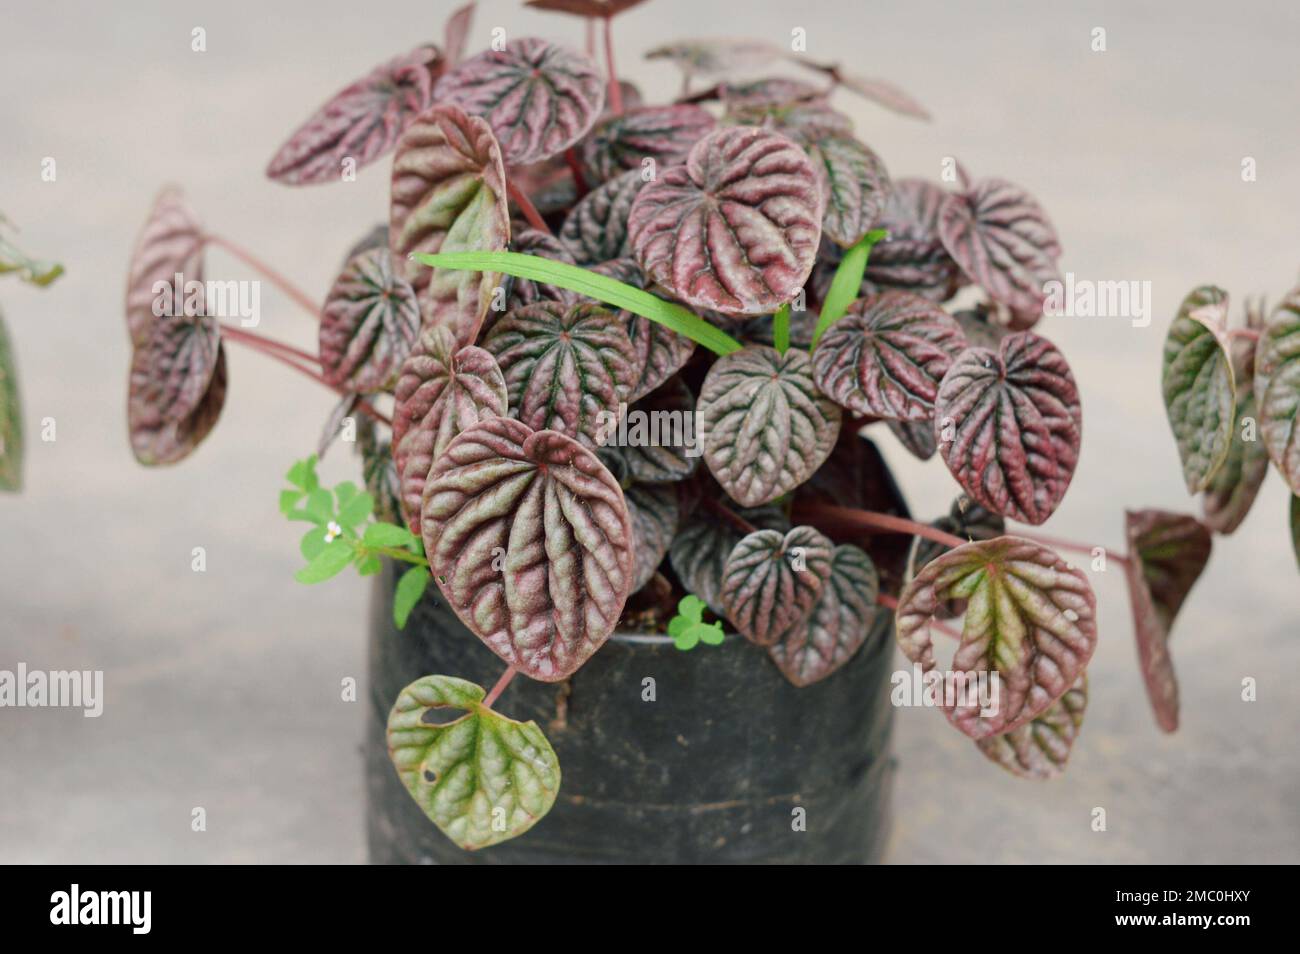 Decorative House Plant on a flower tub isolated. Stock Photo